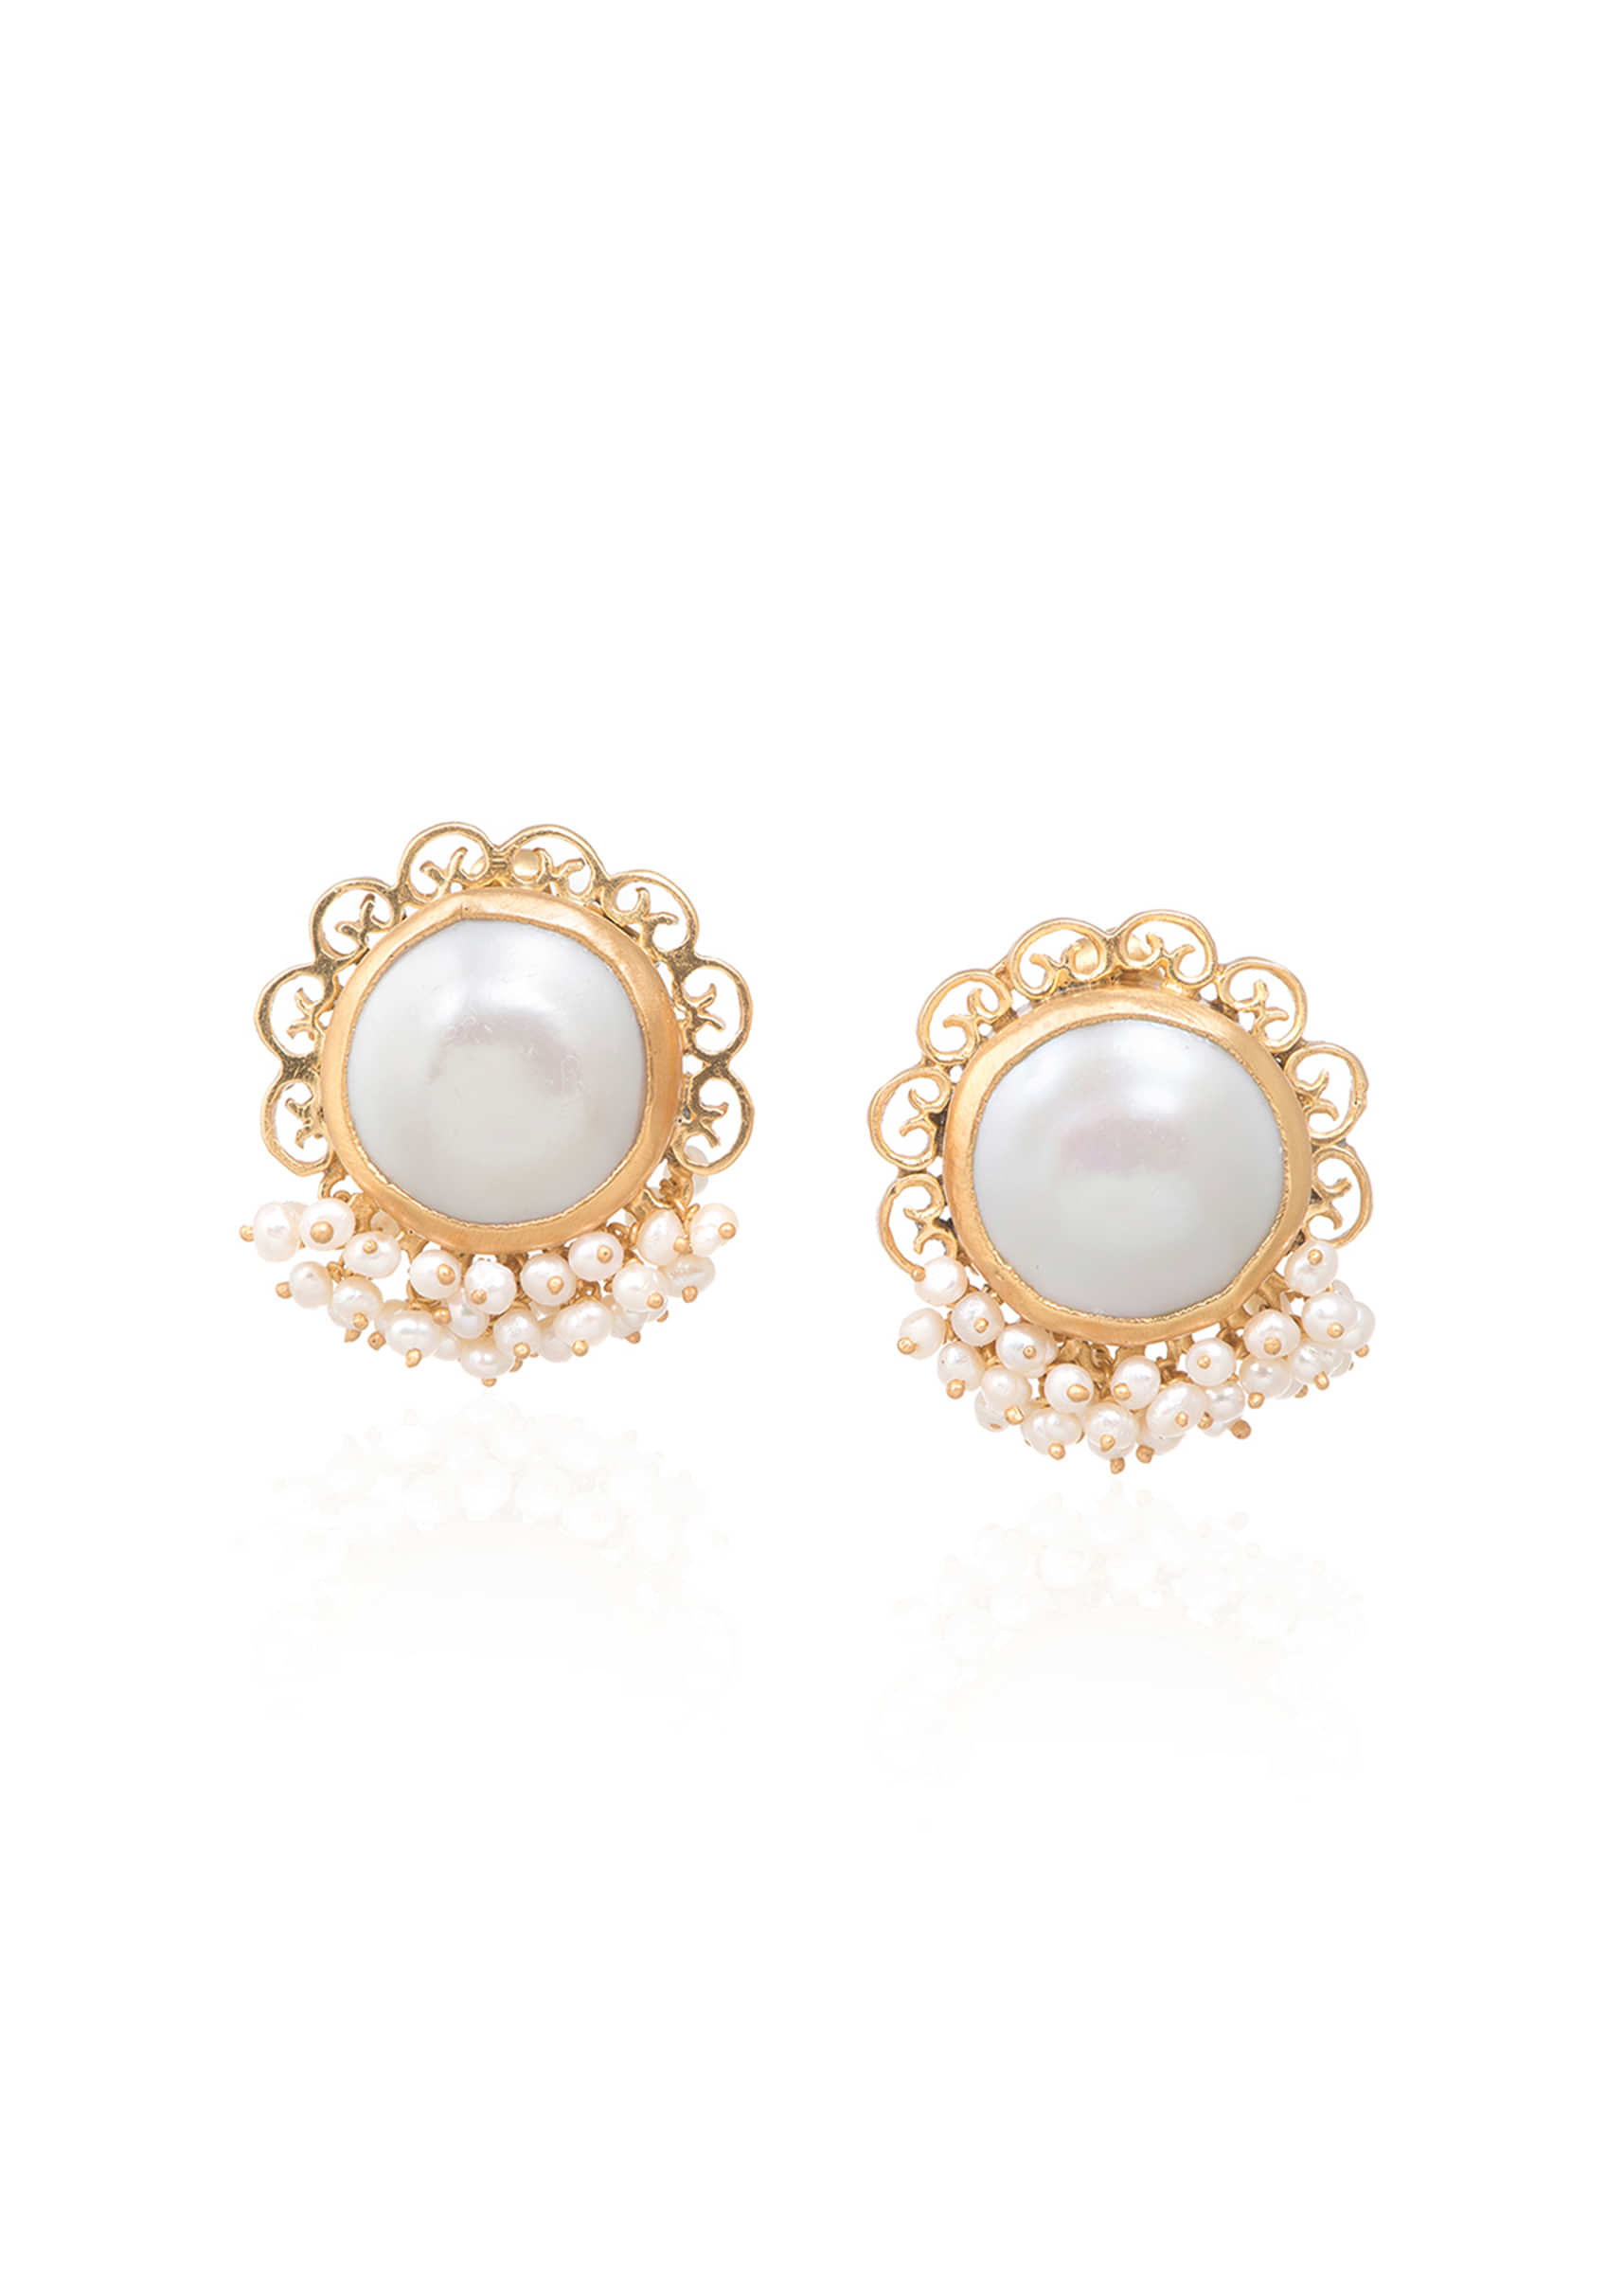 Gold Plated Studs With Baroque Pearls Edged In Filigree Design And Pearls By Zariin